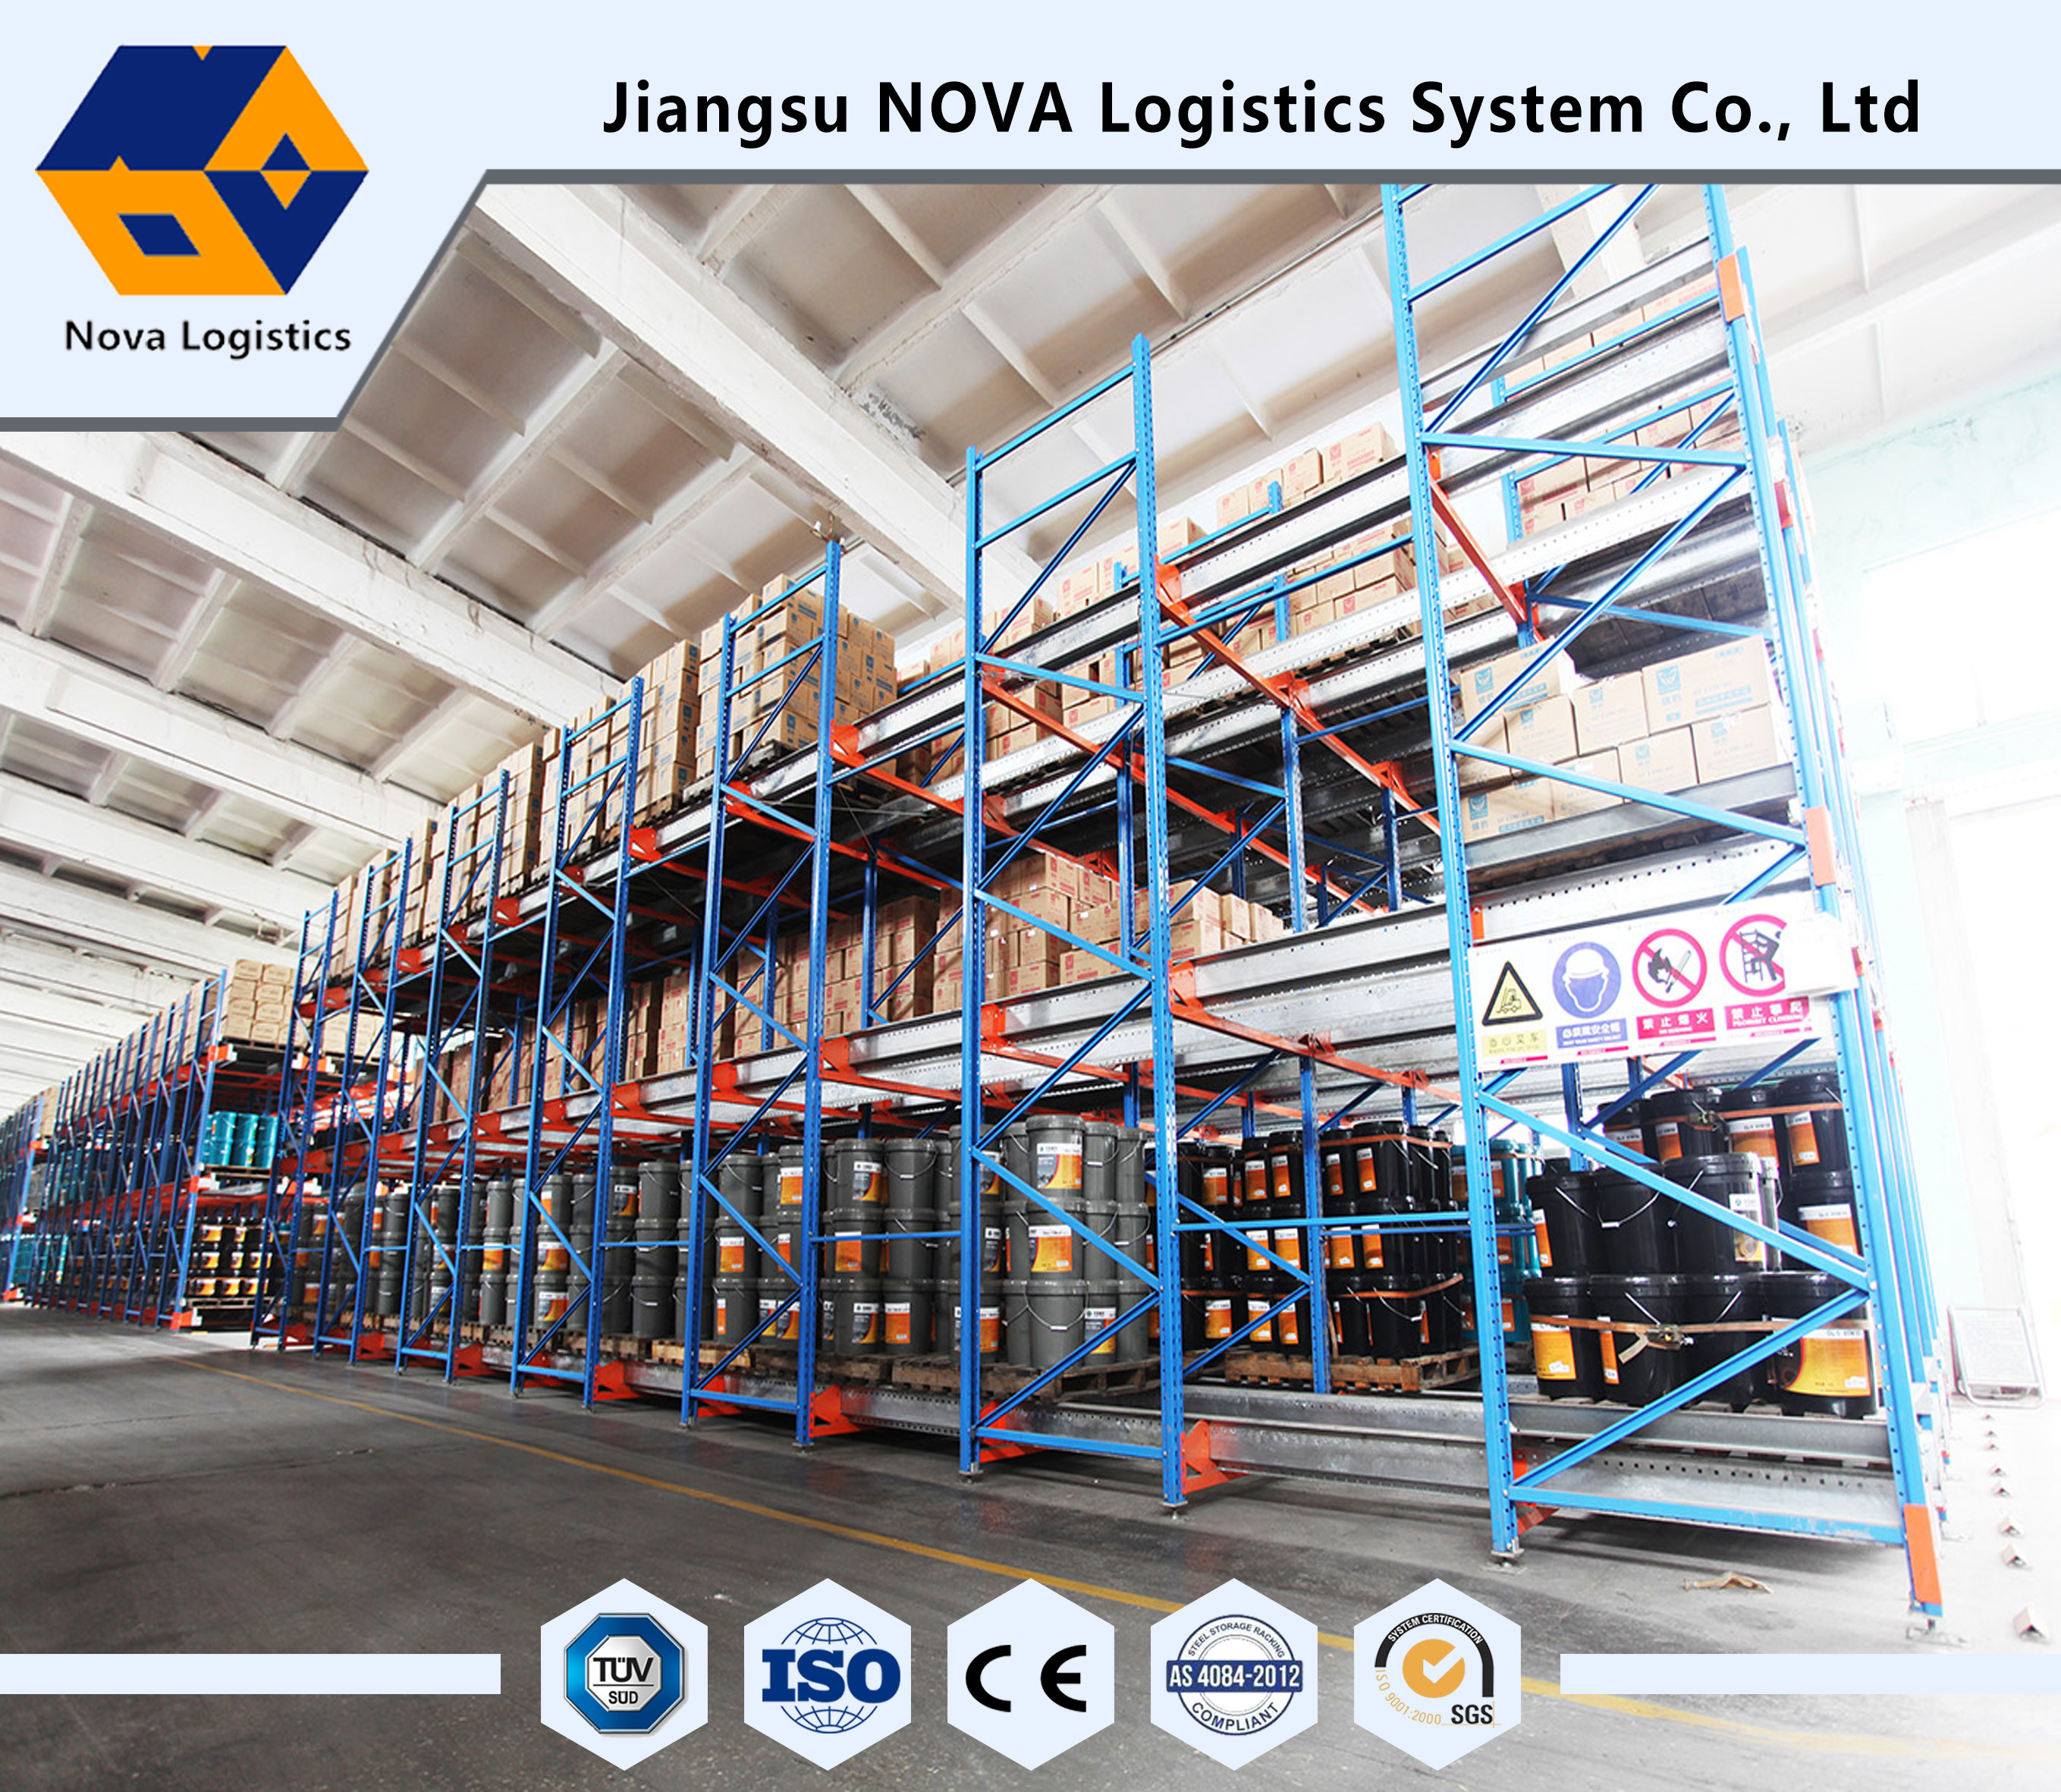 Semi Automatic Pallet Shuttle System With Battery Operated Motor Drive